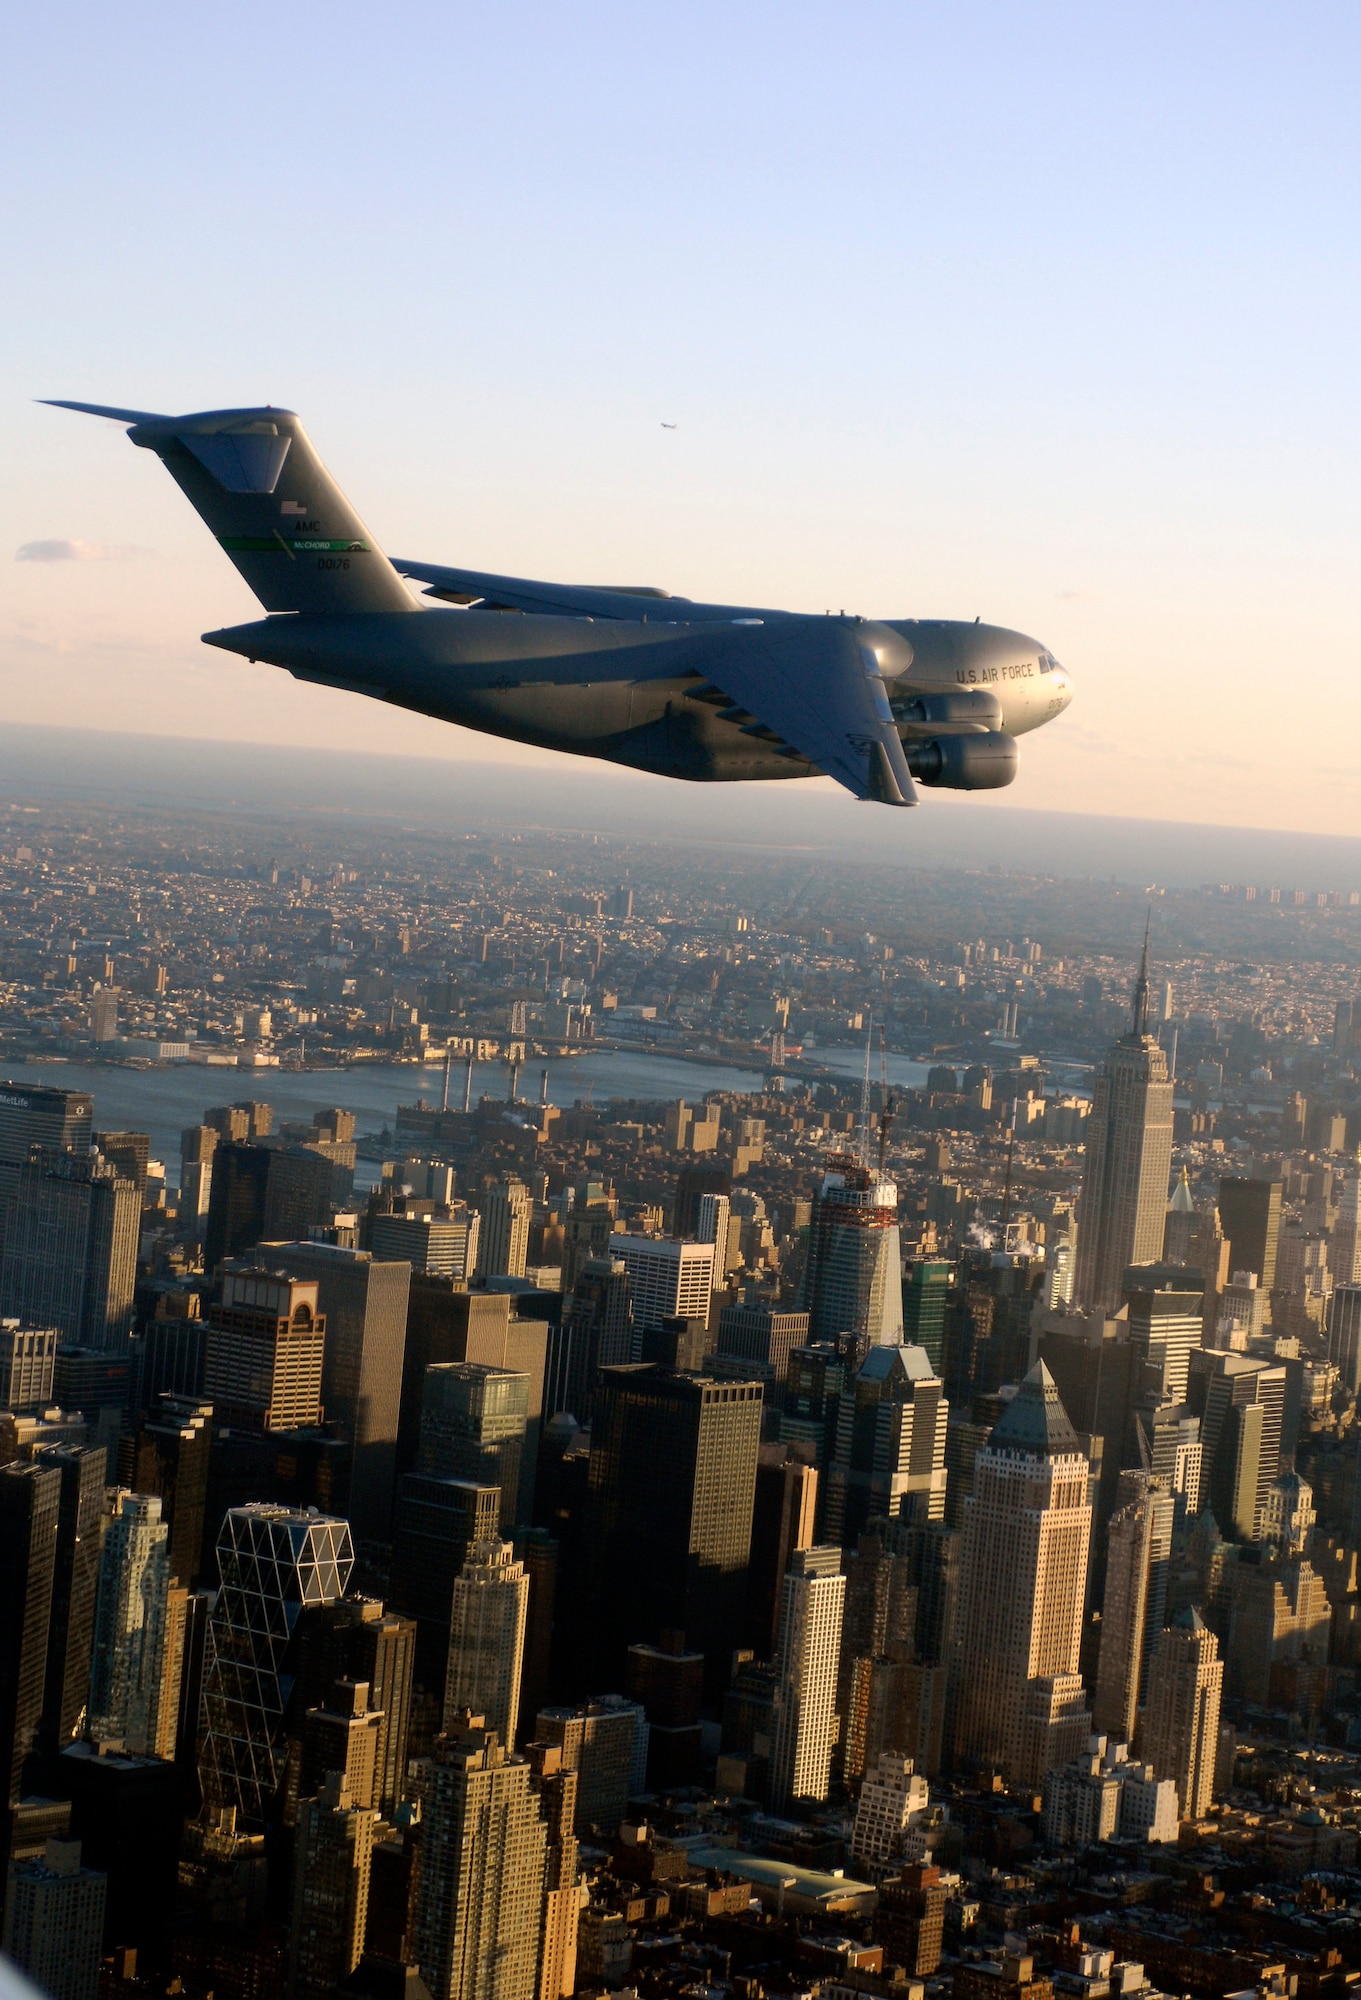 A C-17 Globemaster III flies over New York City after completing the first transcontinental flight on synthetic fuel Dec. 17. The C-17 took off before dawn from McChord Air Force Base, Wash., and landed in the early afternoon at McGuire AFB, N.J. (U.S. Air Force)